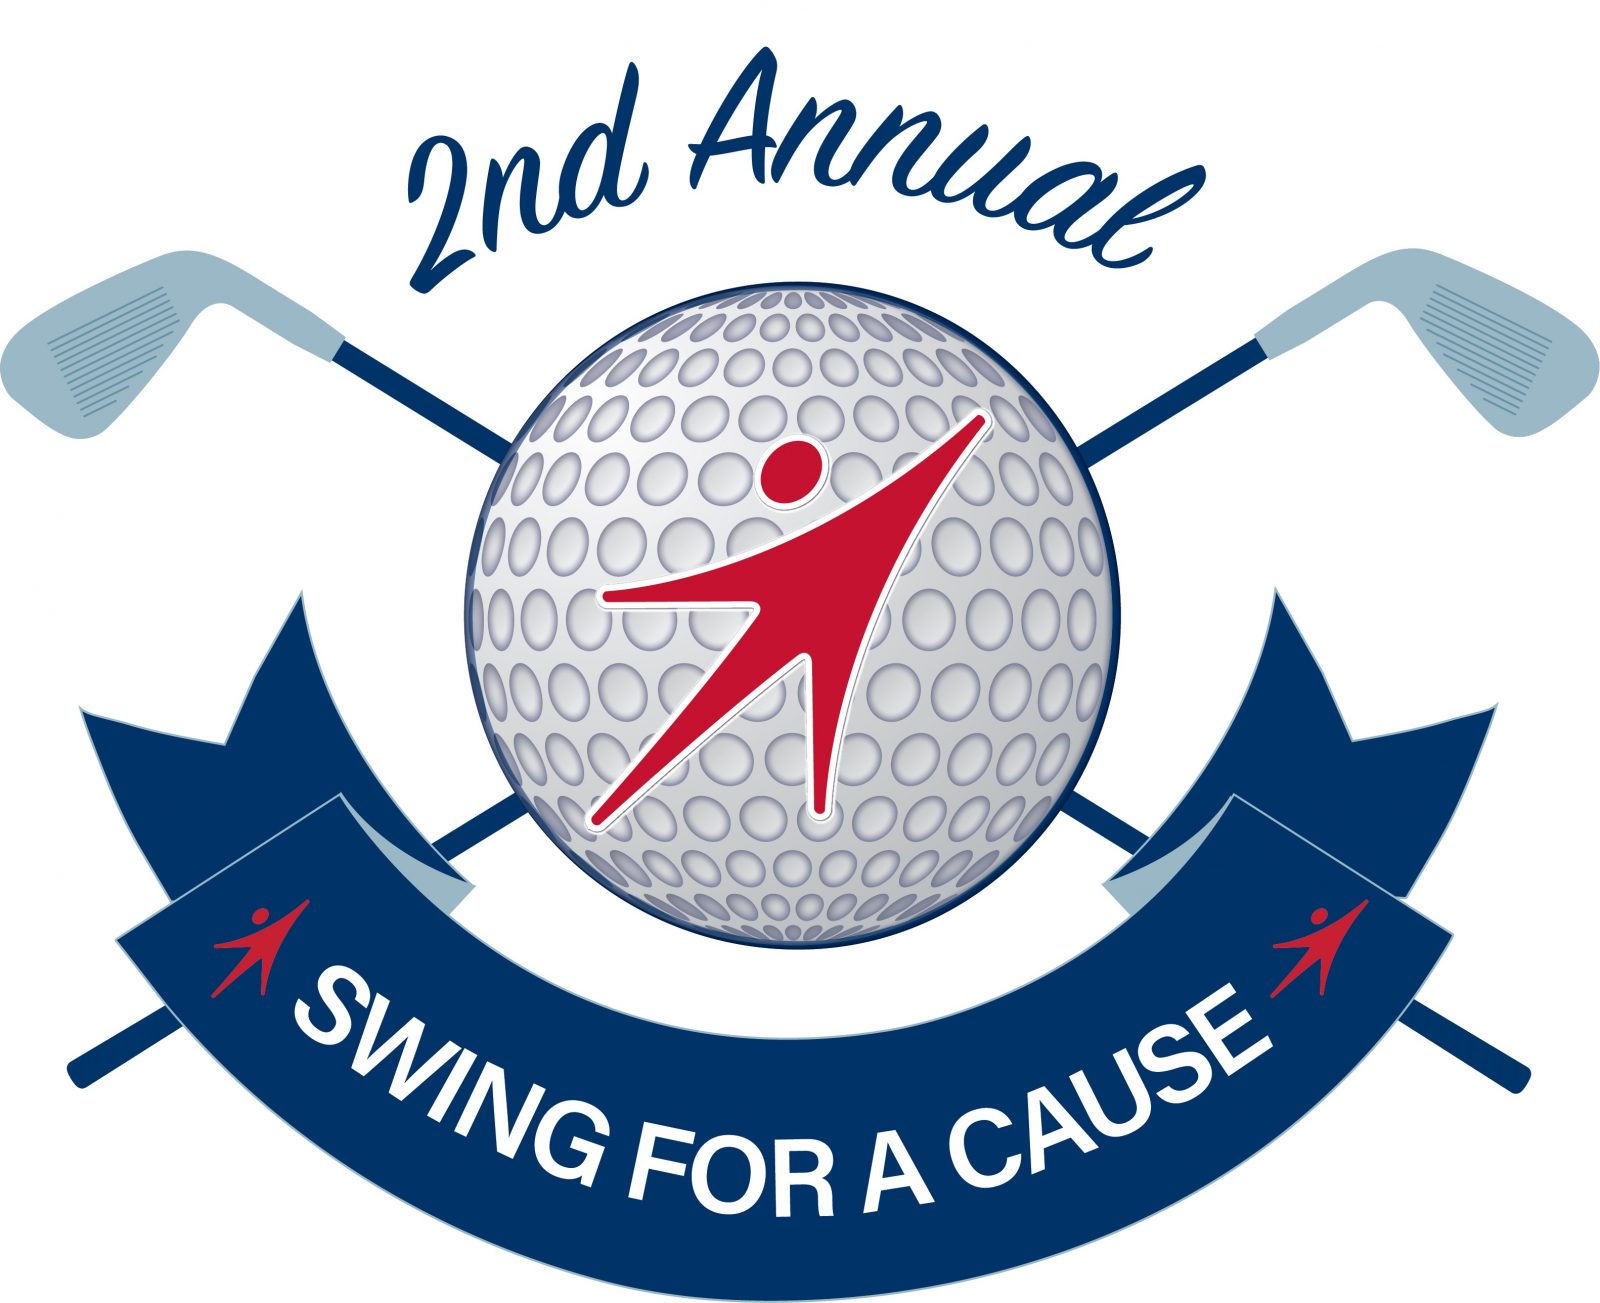 Swing for a cause 2019 1